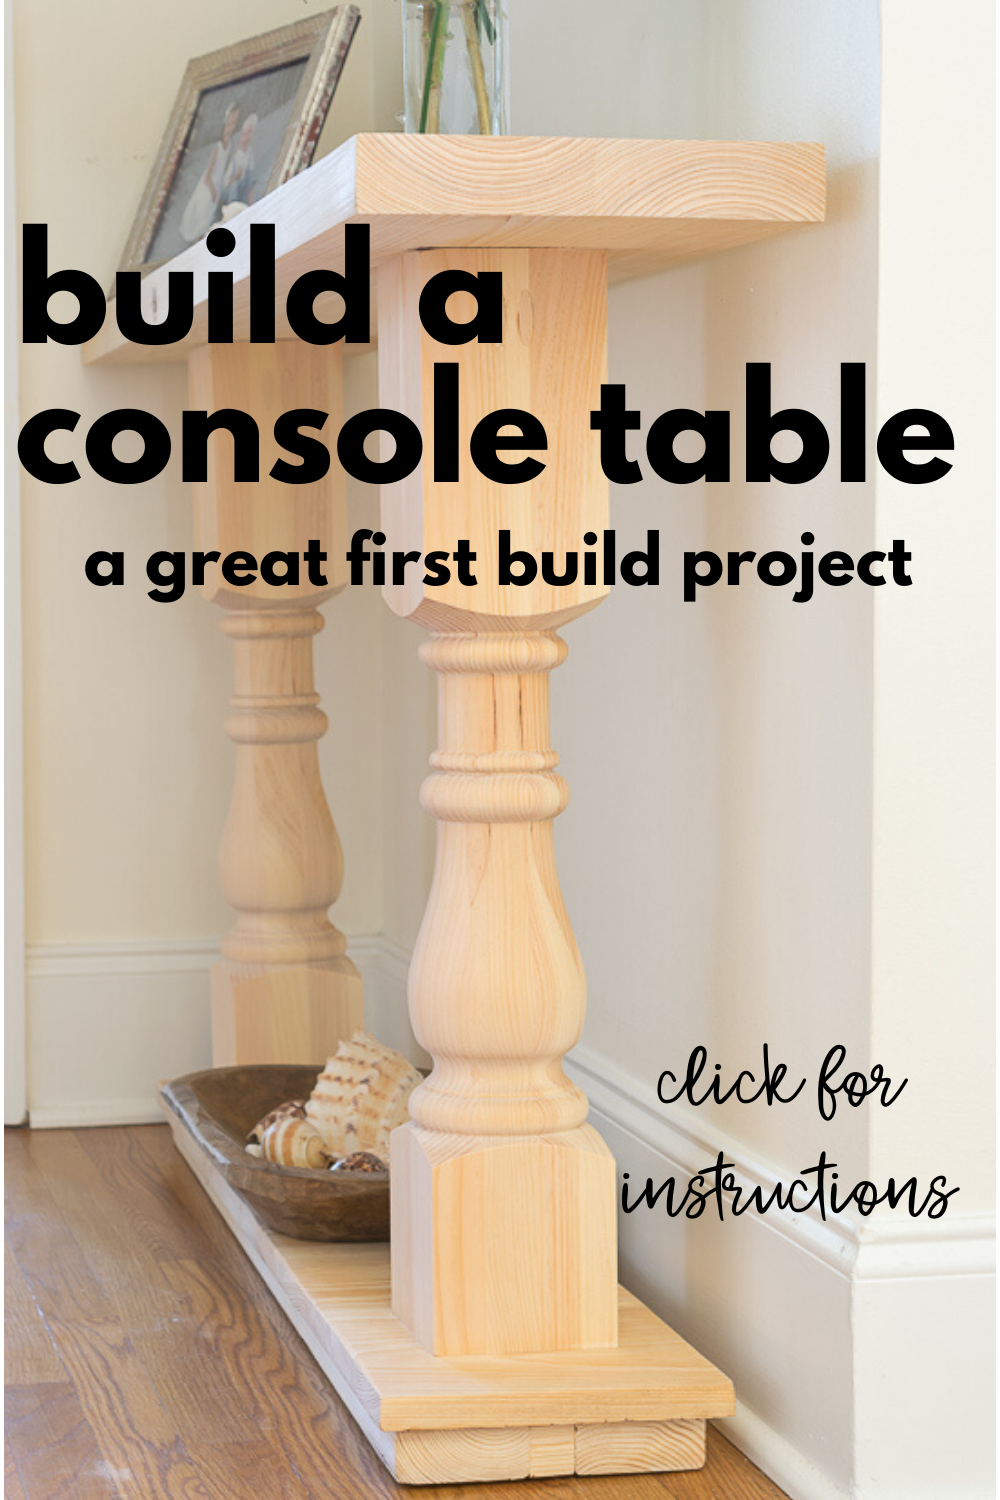 Build a Console Table: A Fun First Furniture Build - Build a Console Table: A Fun First Furniture Build -   21 diy Table upcycle ideas